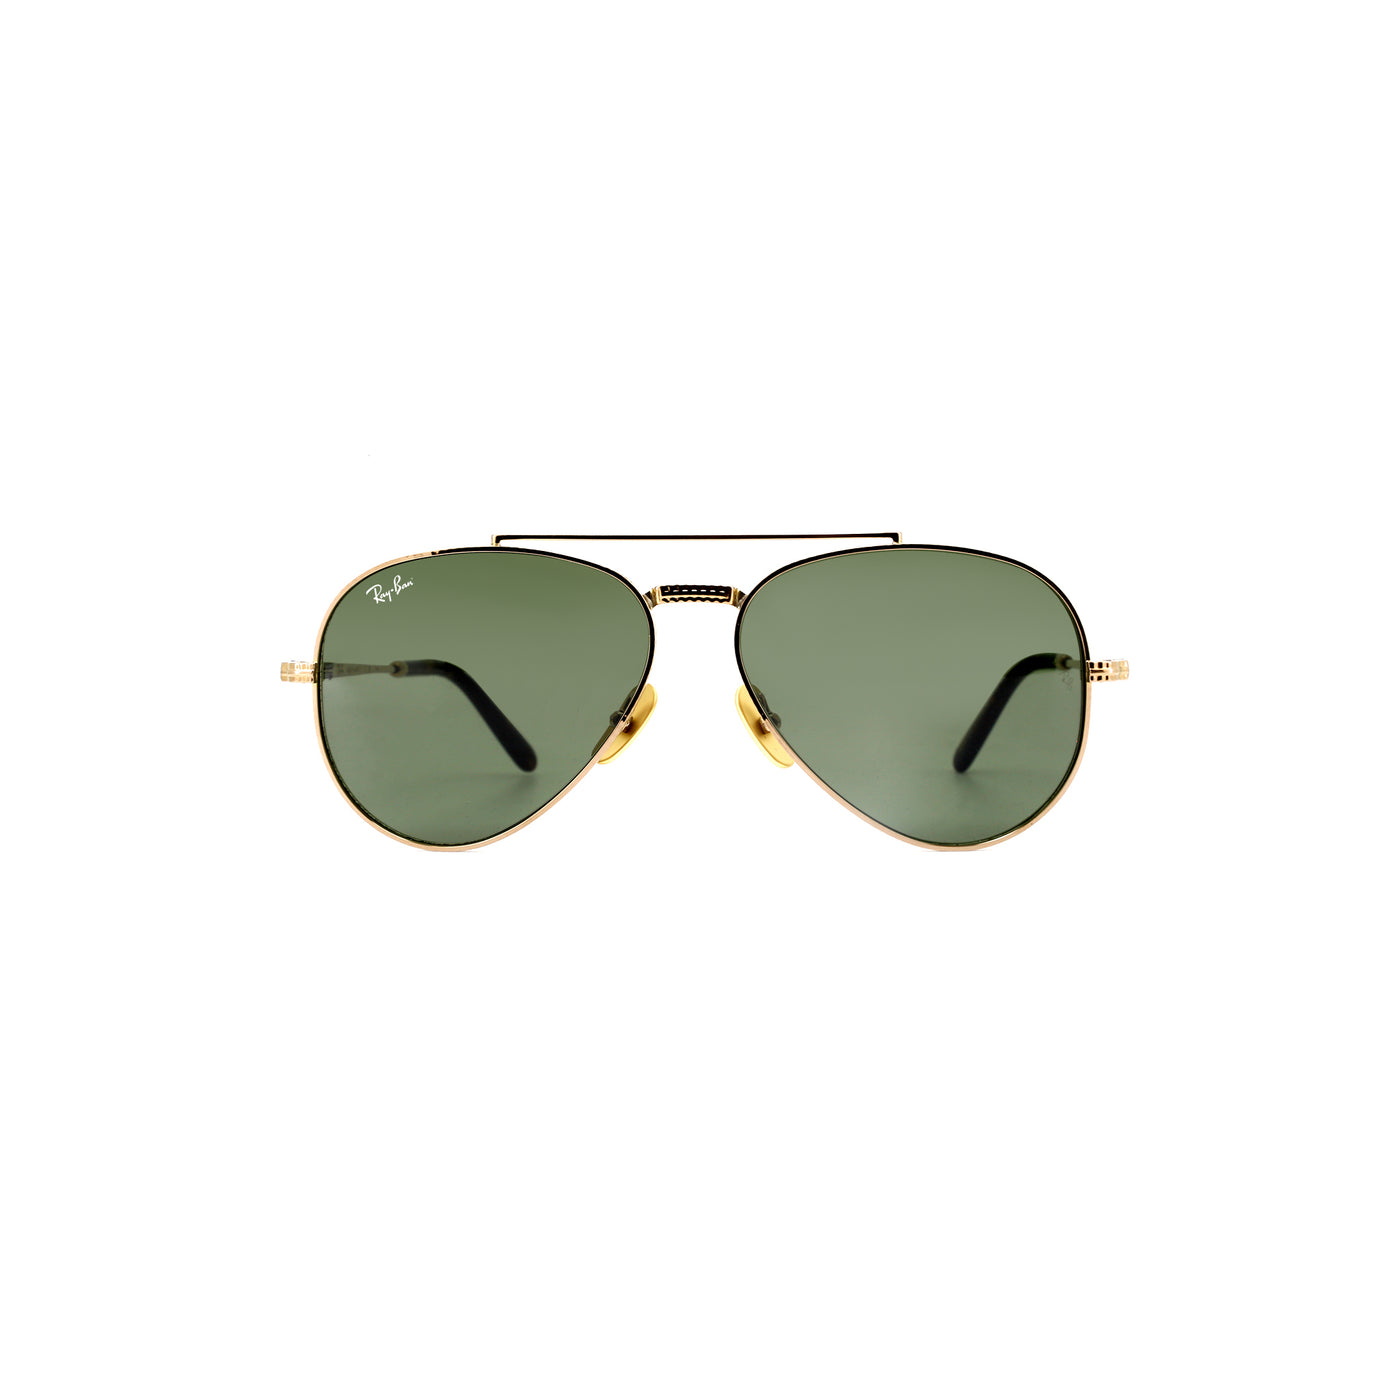 Ray-Ban Sunglasses for Men/Women | RB822531385258 - Vision Express Optical Philippines